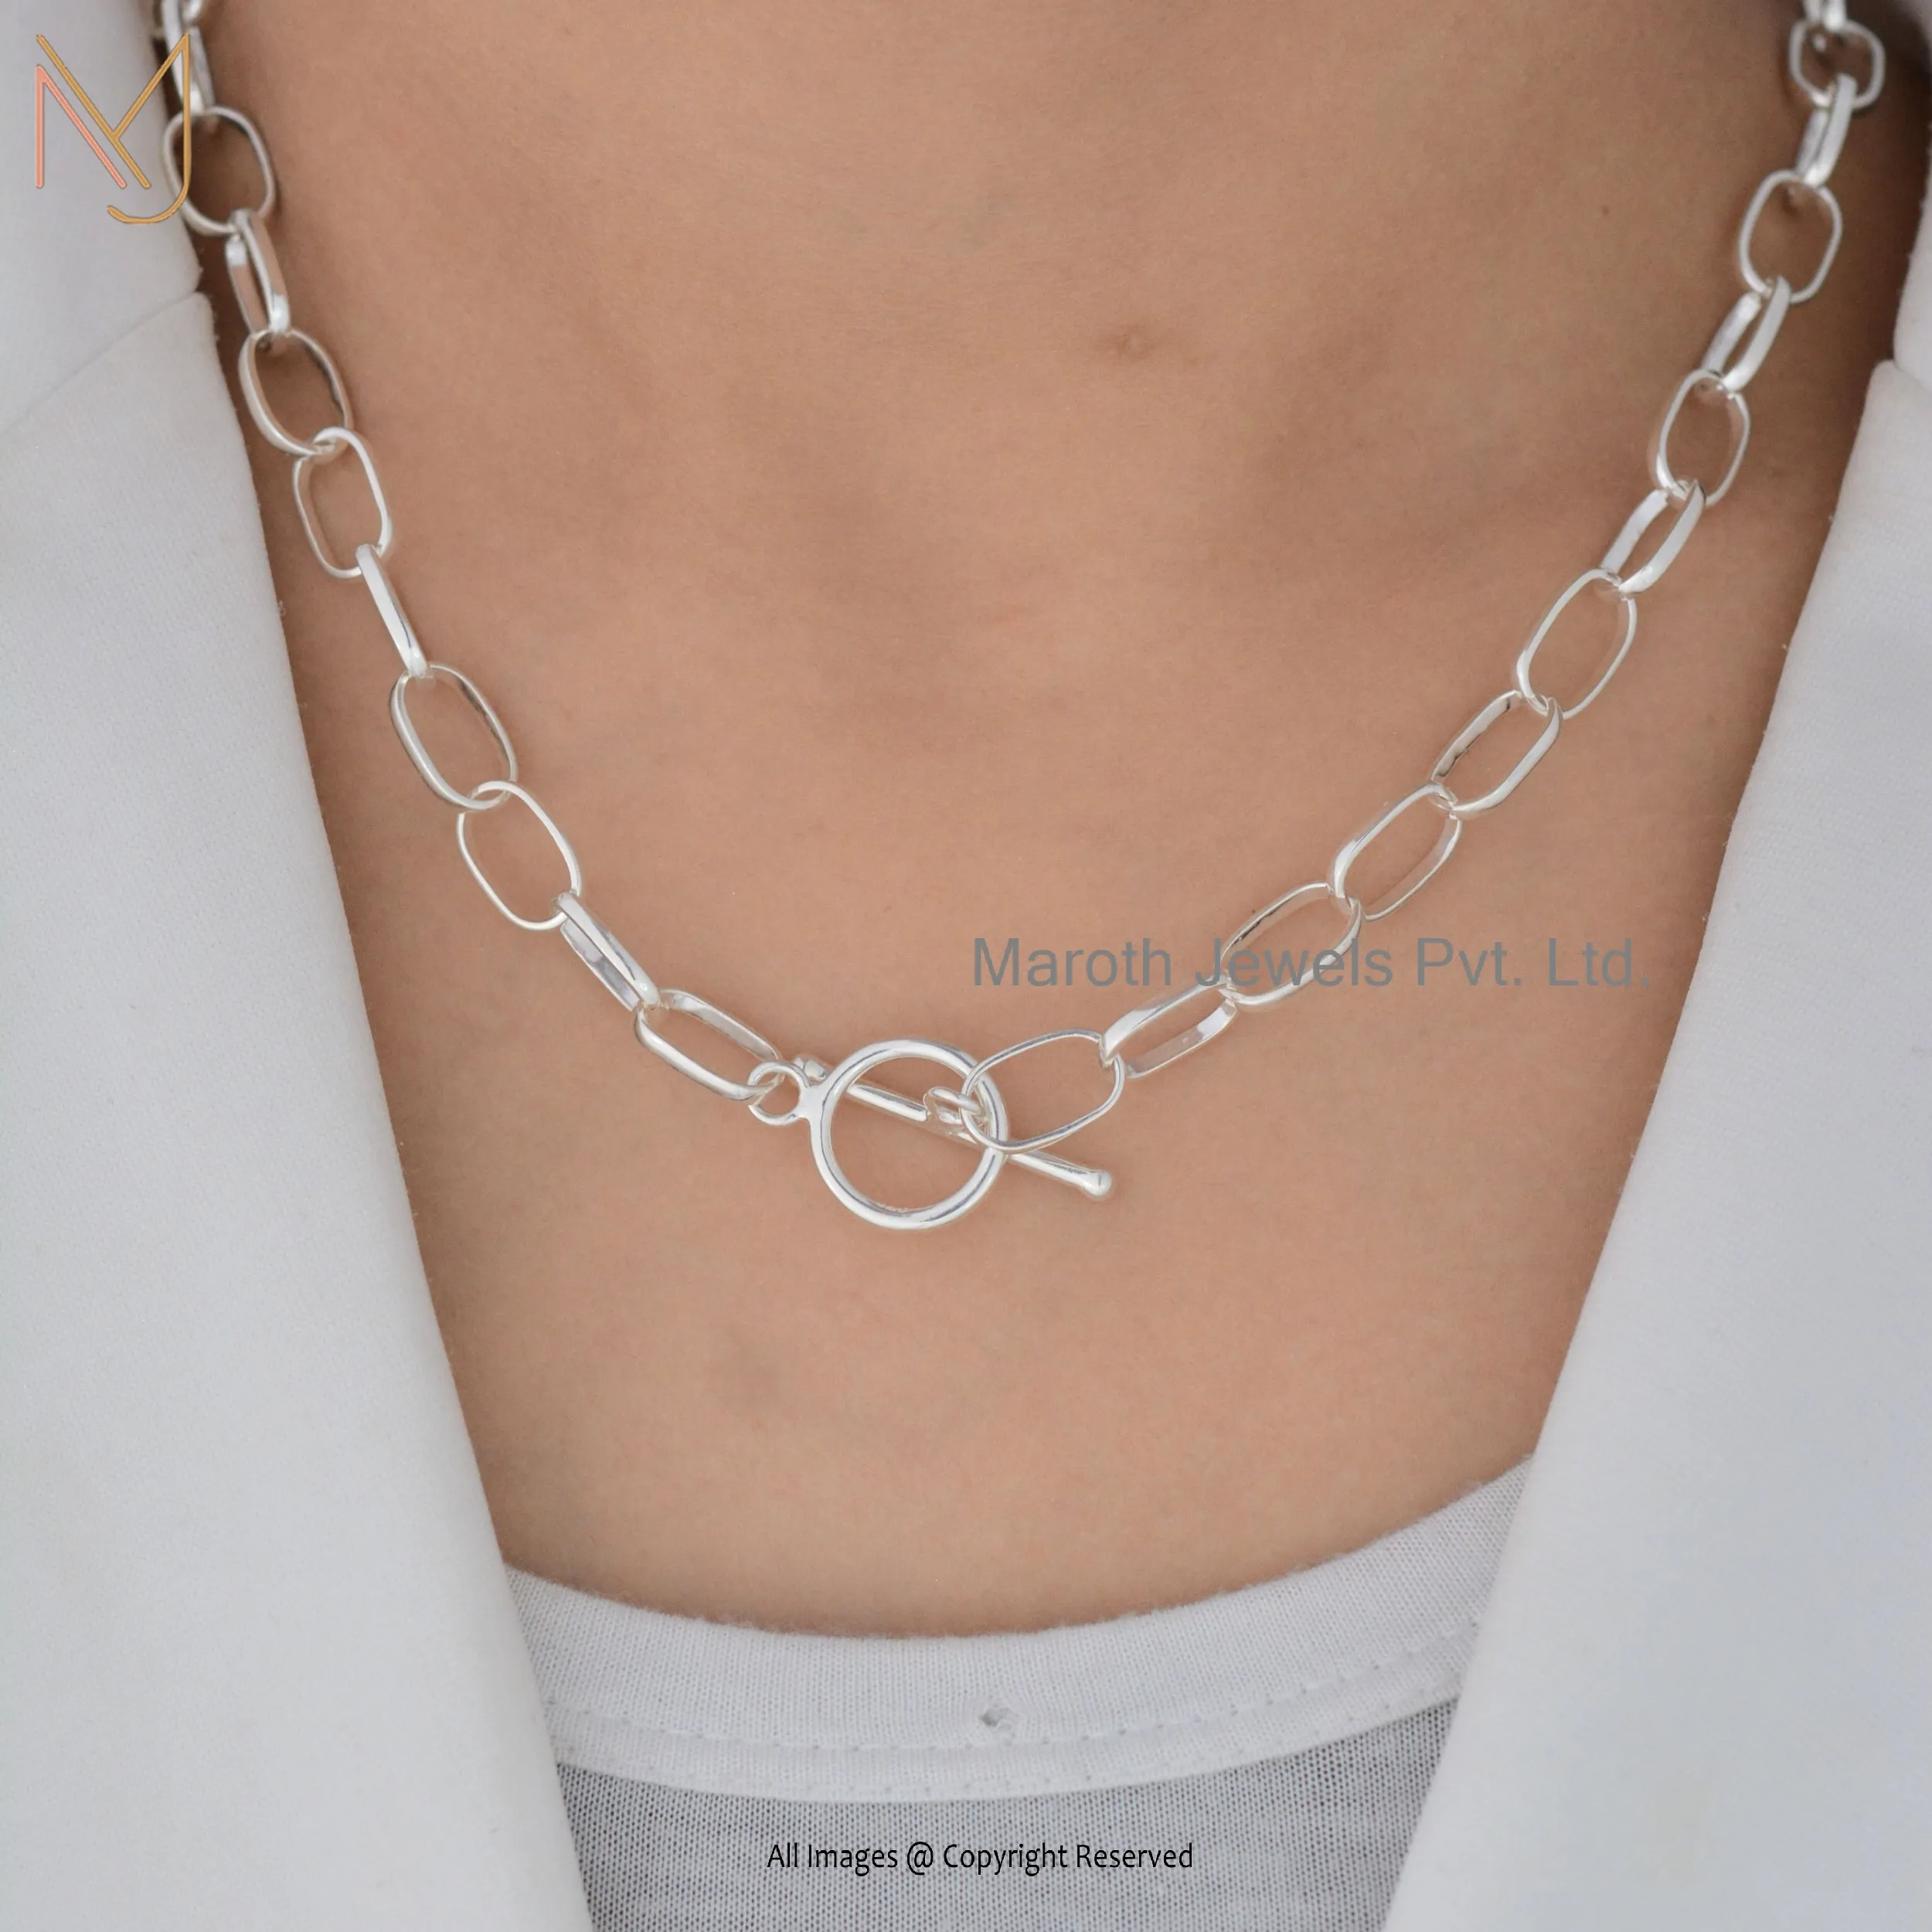 Wholesale 925 Silver Paperclip Chain Necklace With Toggle Clasp Jewelry